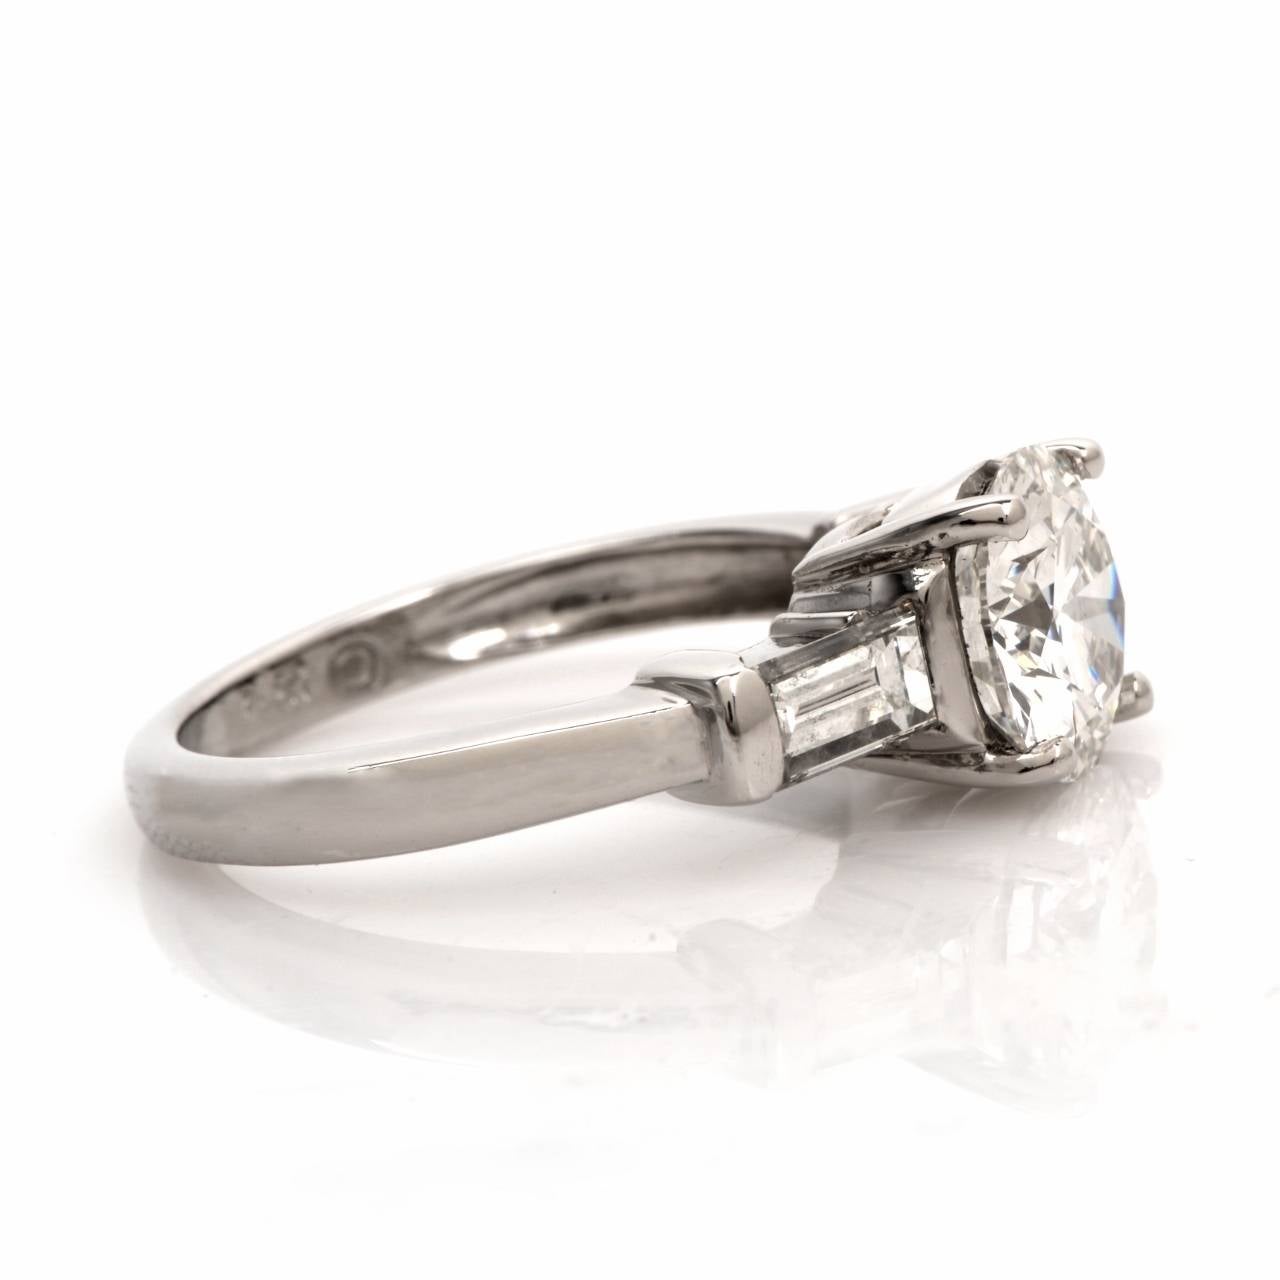 This classically distinct estate engagement ring with a round brilliant-cut and a pair of baguette diamonds is crafted in solid platinum and weighs approx. 3.67 grams. Designed with  quintessentially vintage characteristics, this alluring engagement